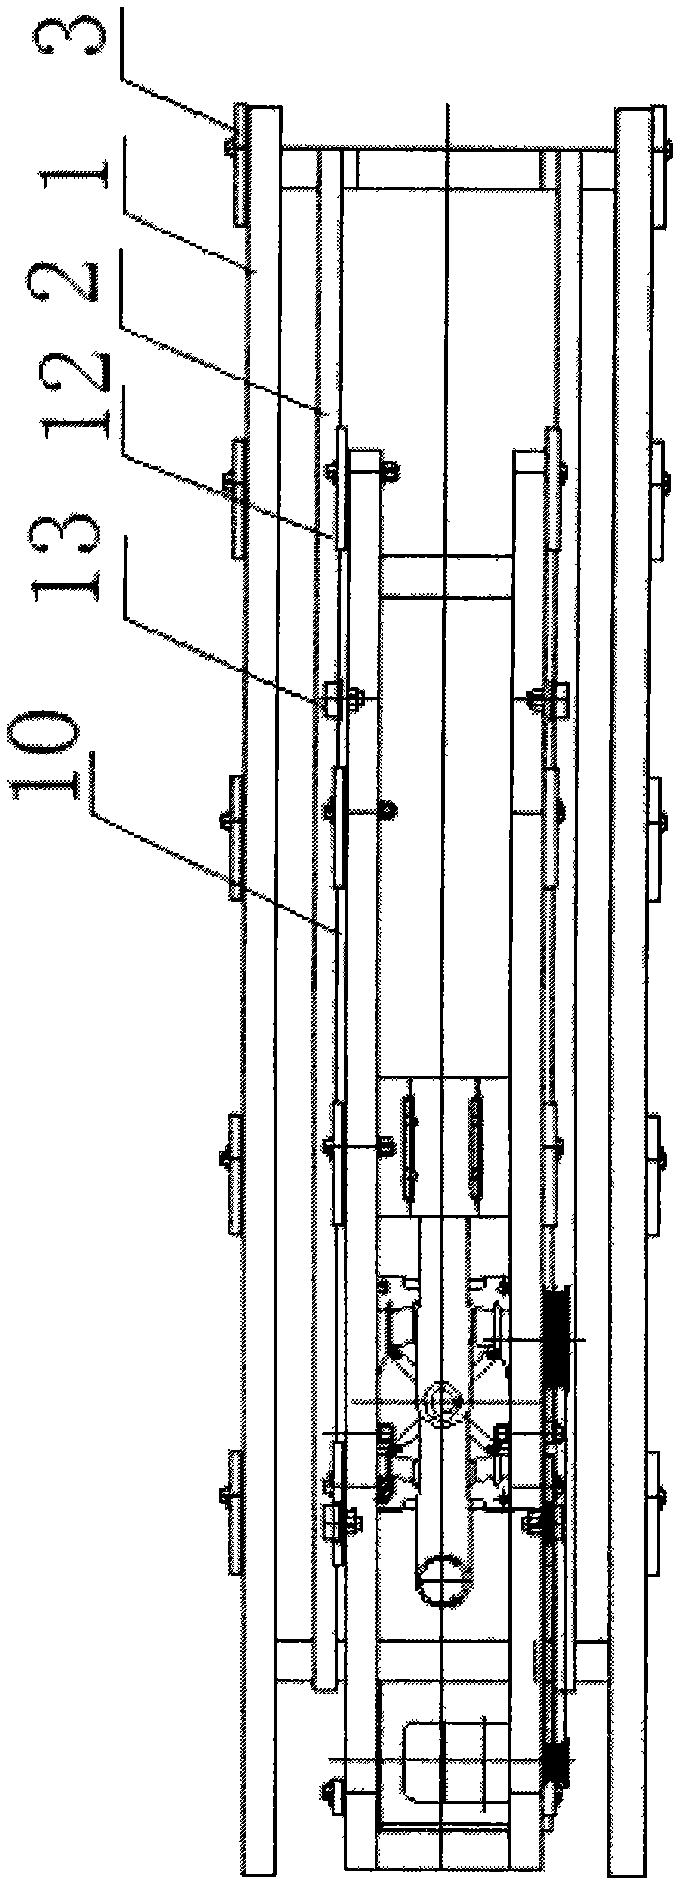 Plate conveying mechanism based on building block forming machine